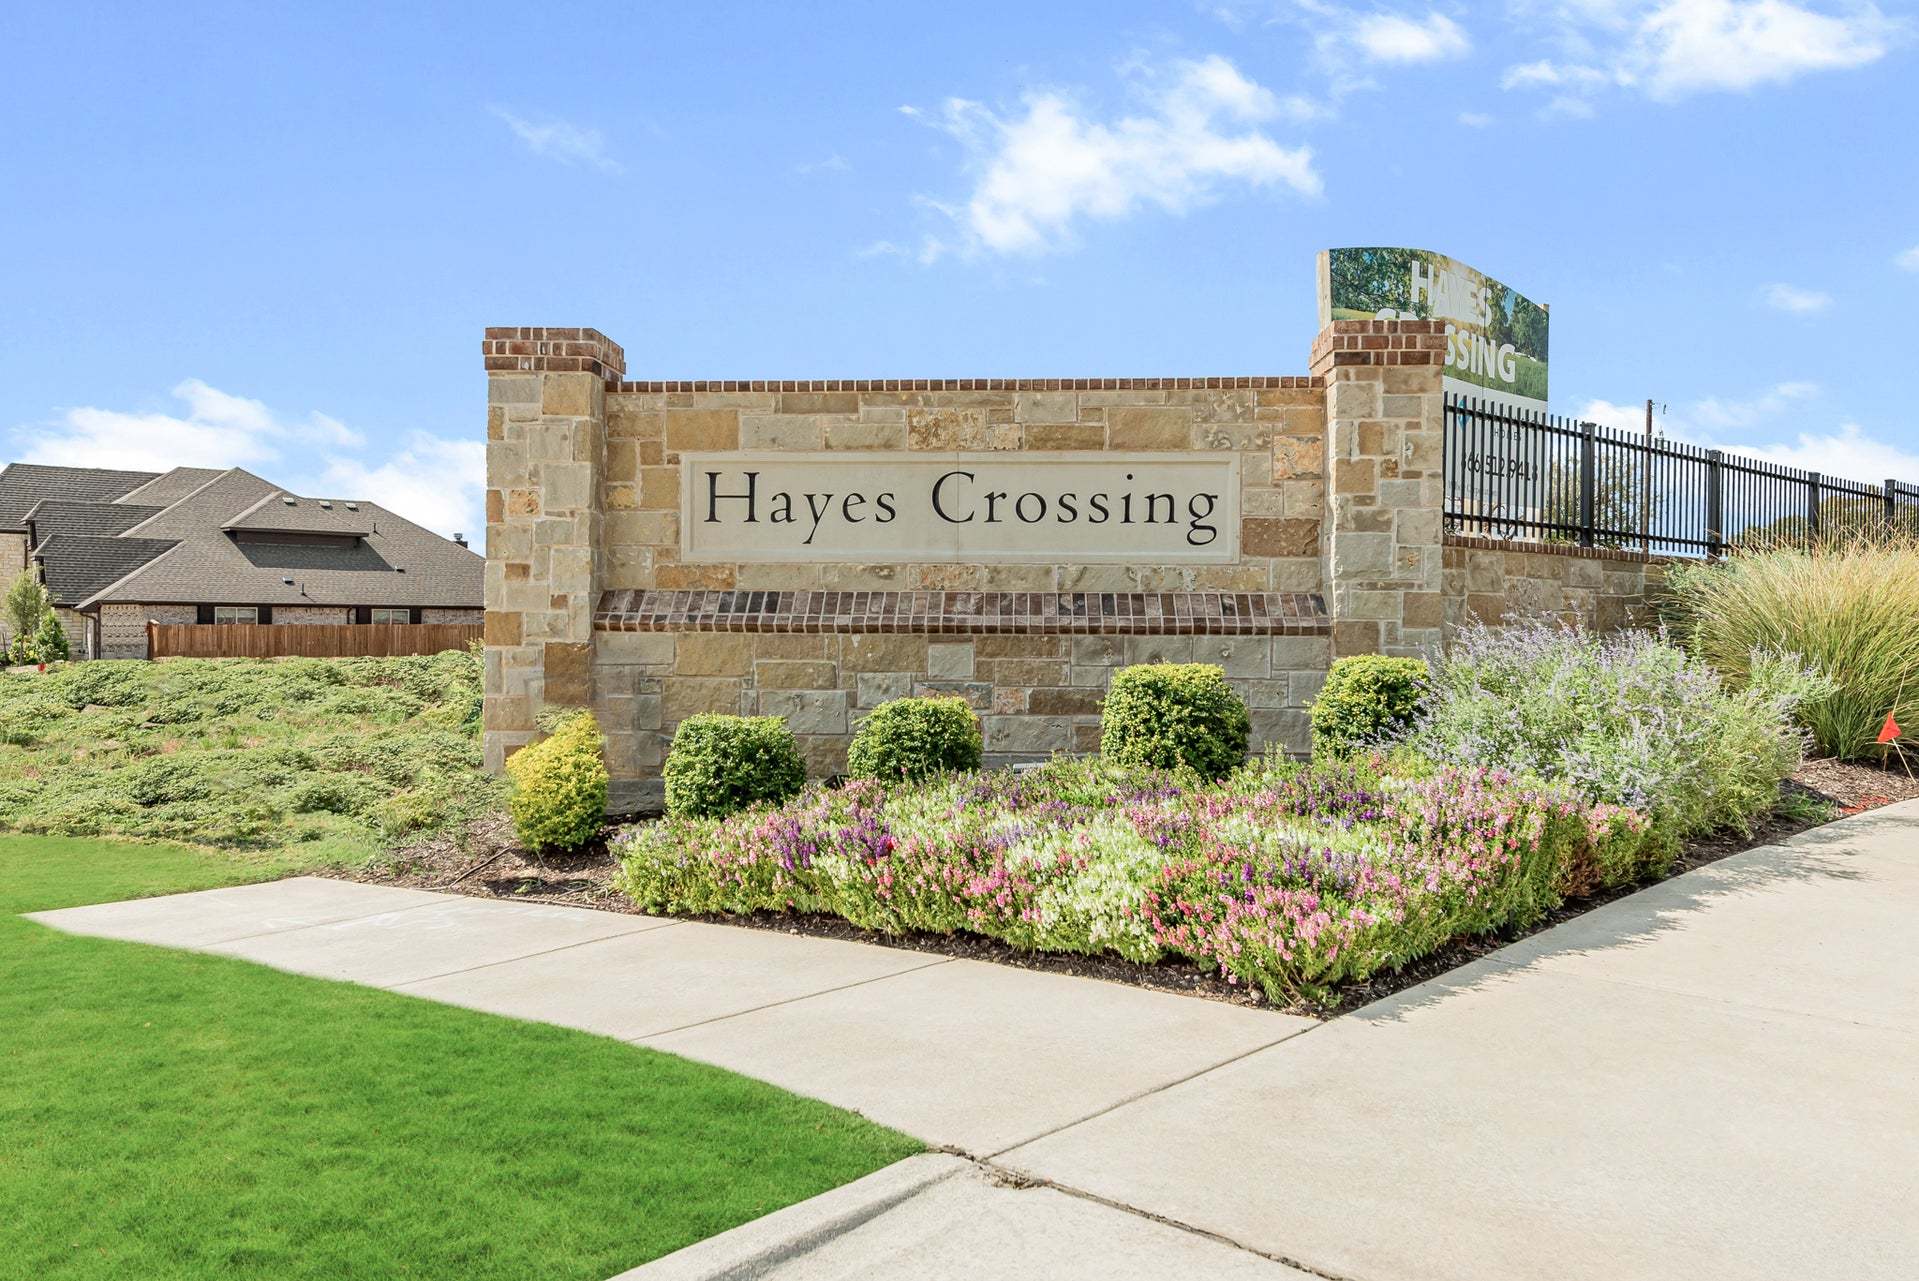 Hayes Crossing Entrance Sign